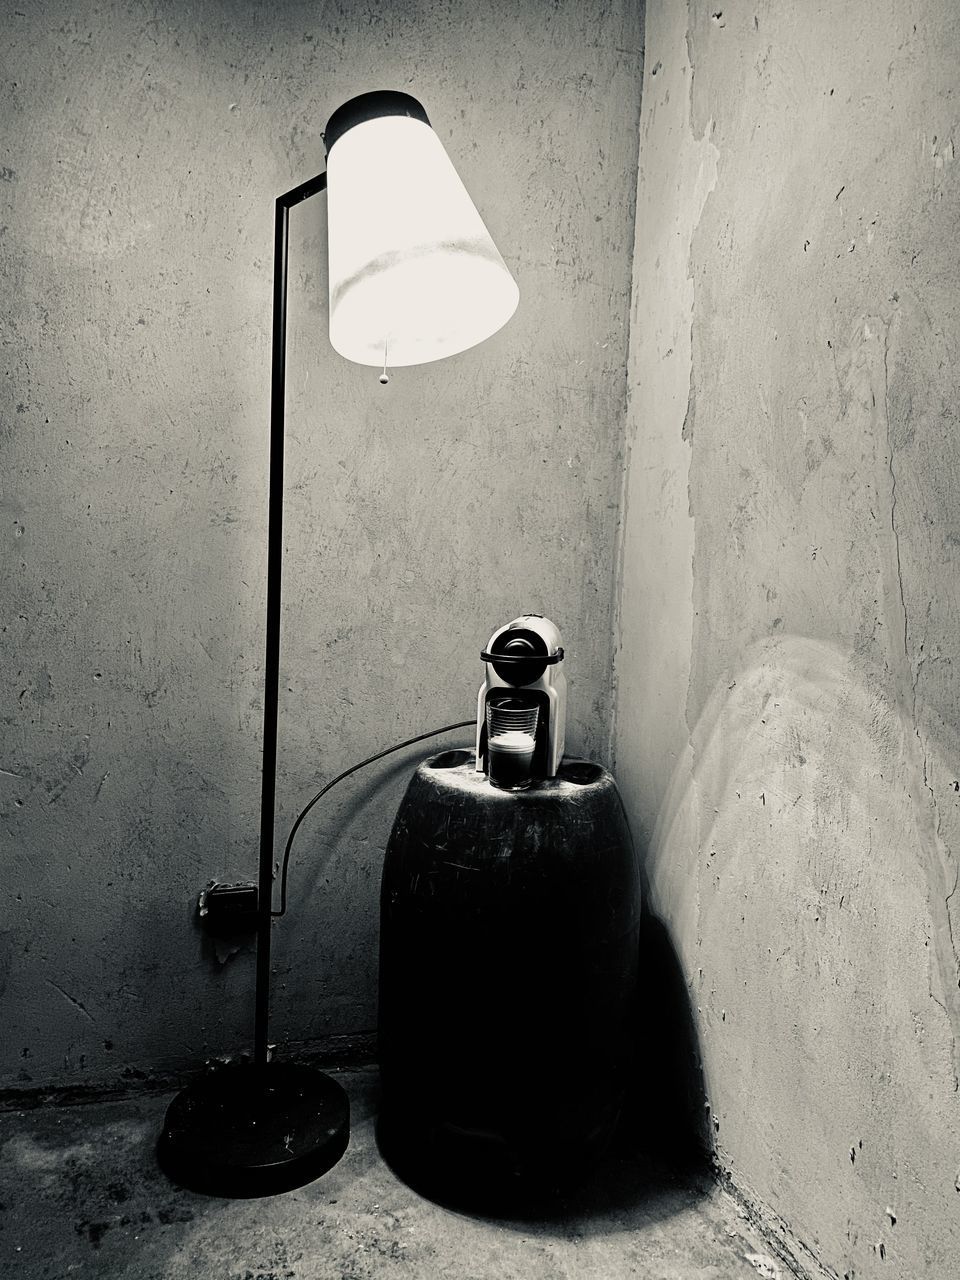 CLOSE-UP OF LAMP AGAINST WALL